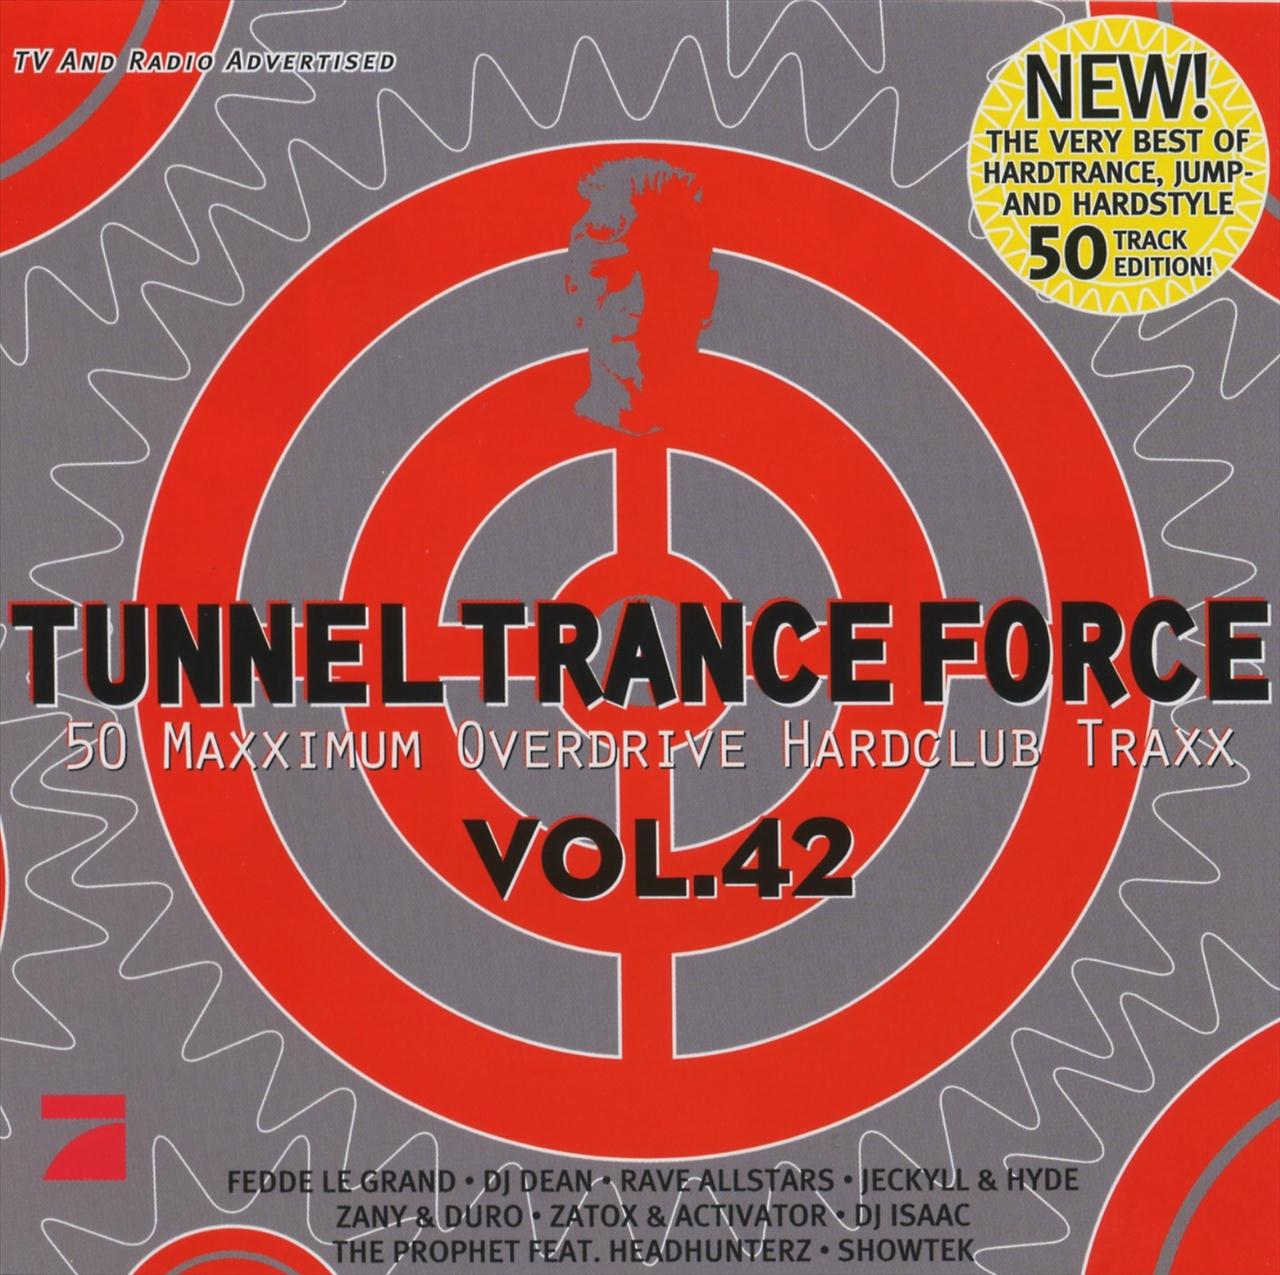 Tunnel Trance Force vol.42 - 000_va_-_tunnel_trance_force_vol_42-2cd-2007-cover_front.jpg